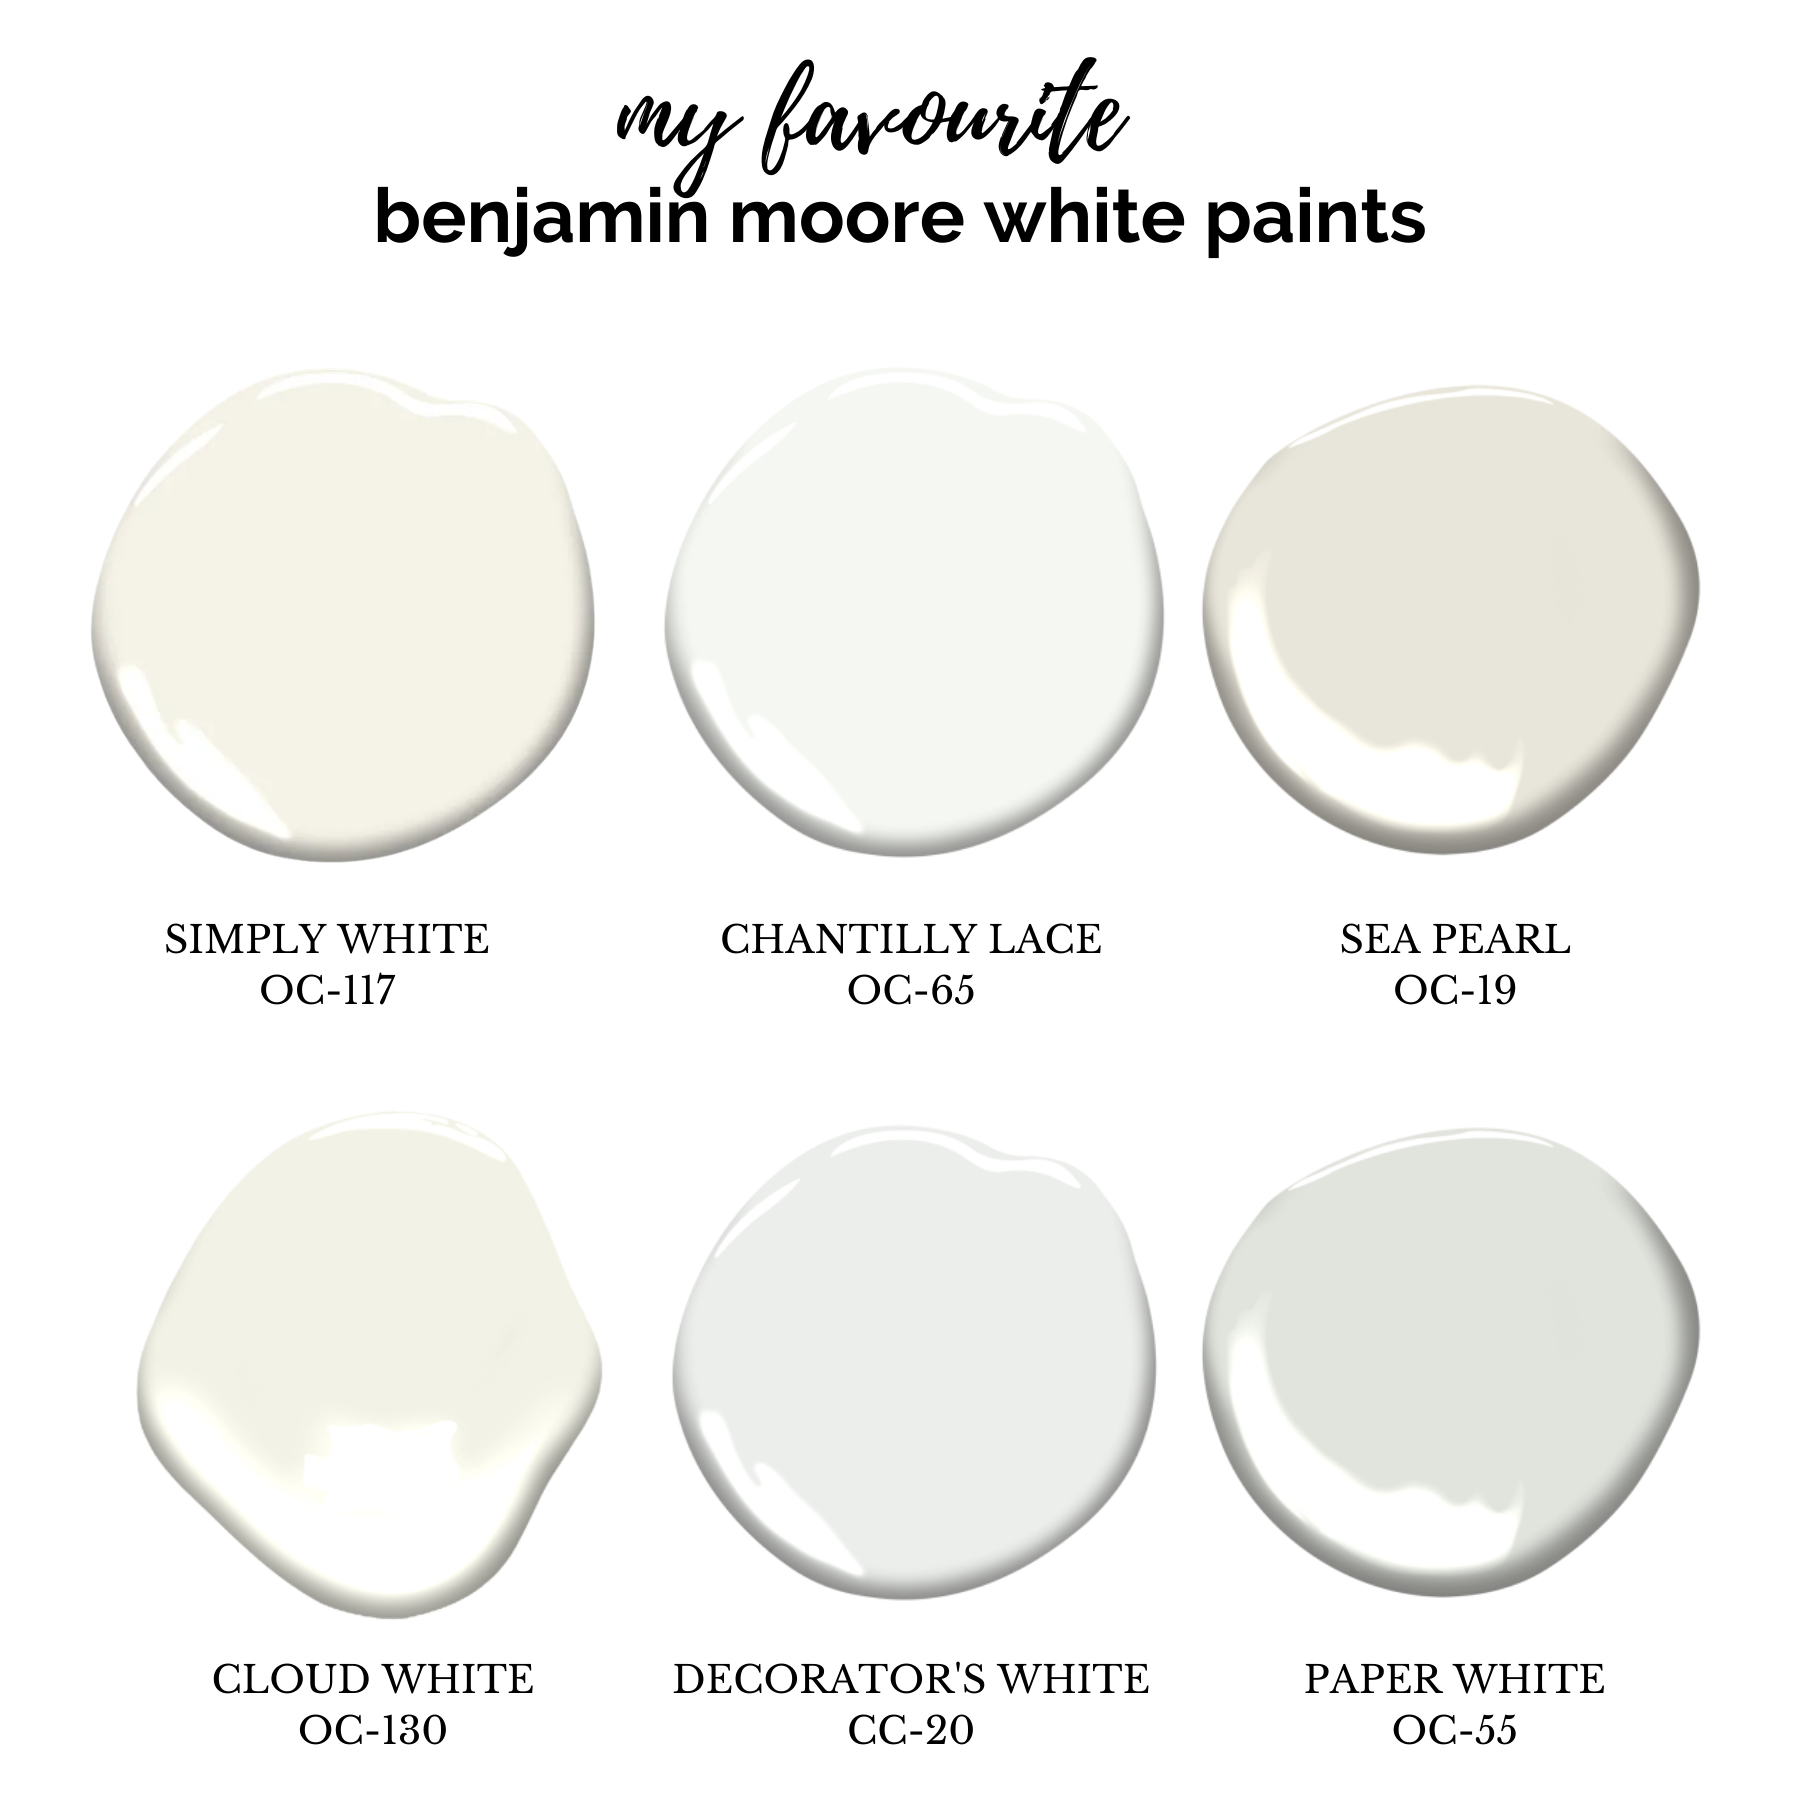 benjamin moore white paints, simply white, cloud white, sea pearl, decorators white, chantilly lace